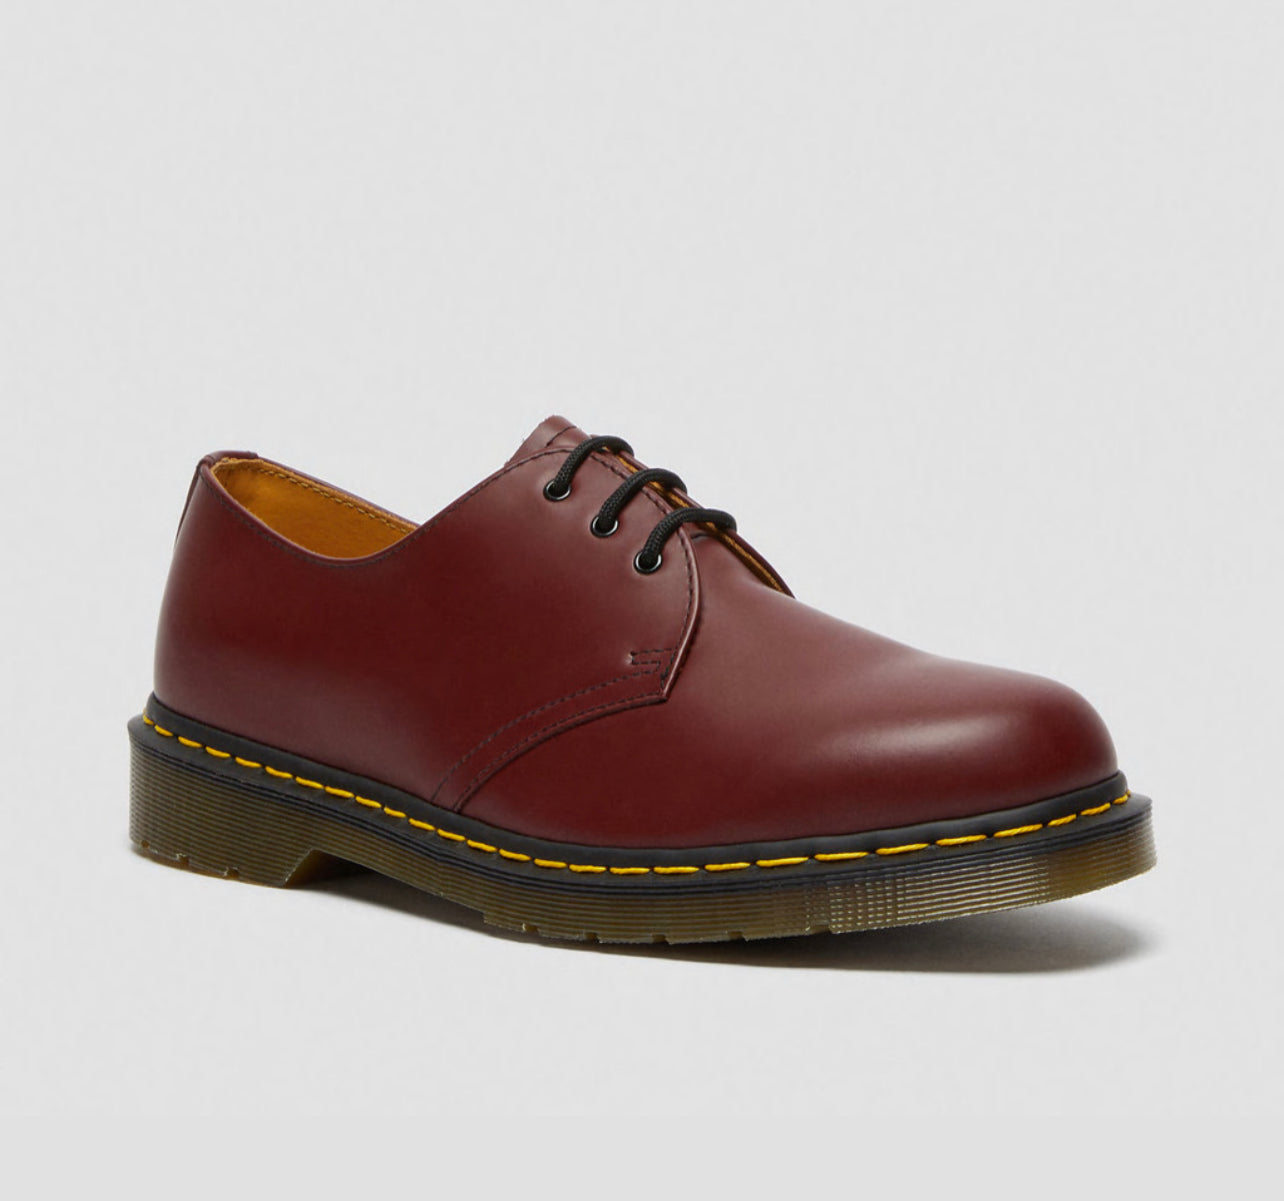 Dr Martens 1461 Oxford Leather Shoes - Cherry Red